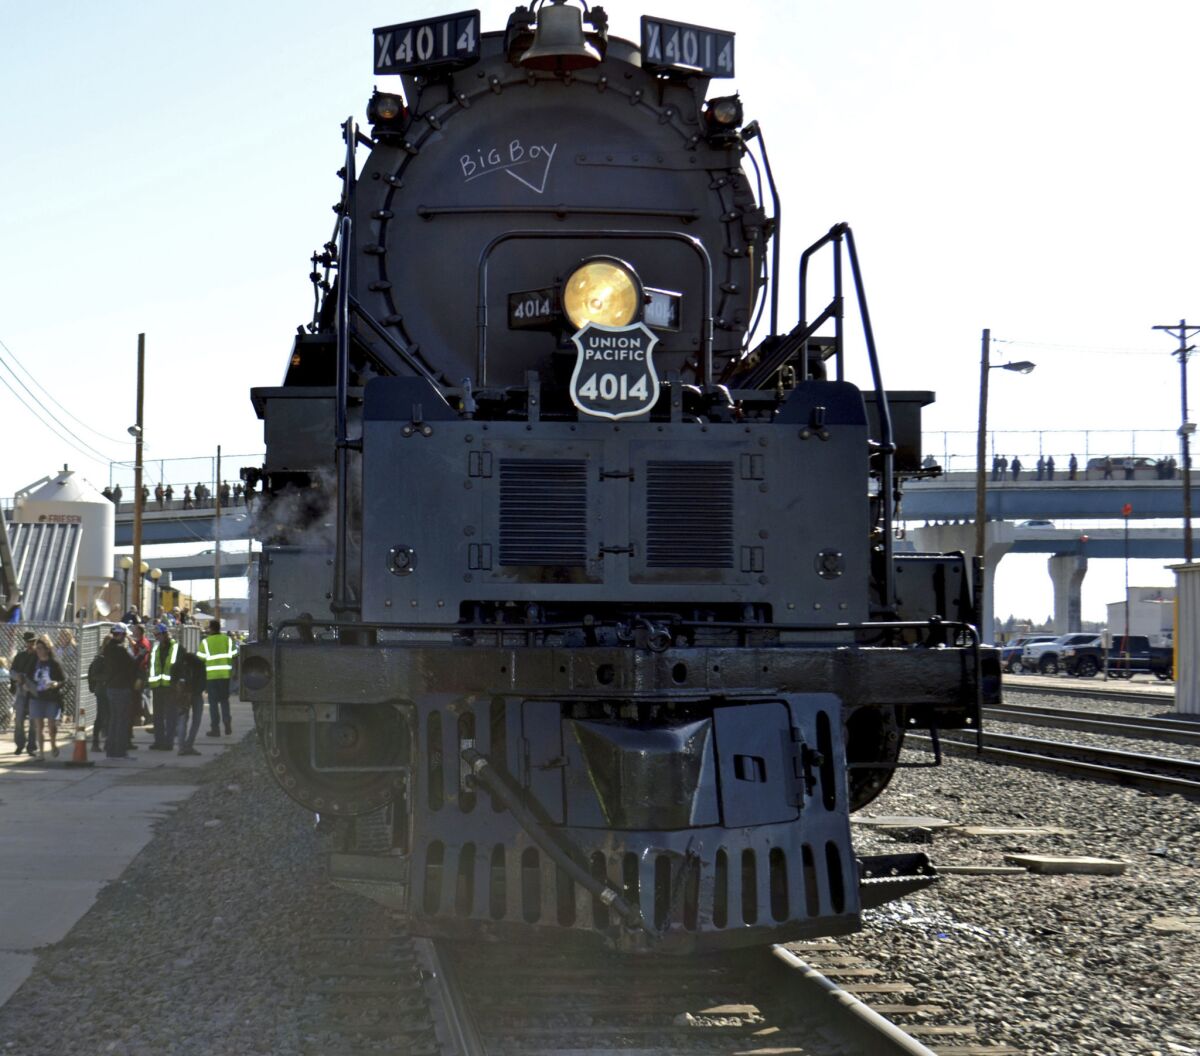 Big Boy No. 4014 rolls out of a Union Pacific restoration shop at the Cheyenne Depot Museum in Cheyenne, Wyo., on May 4.